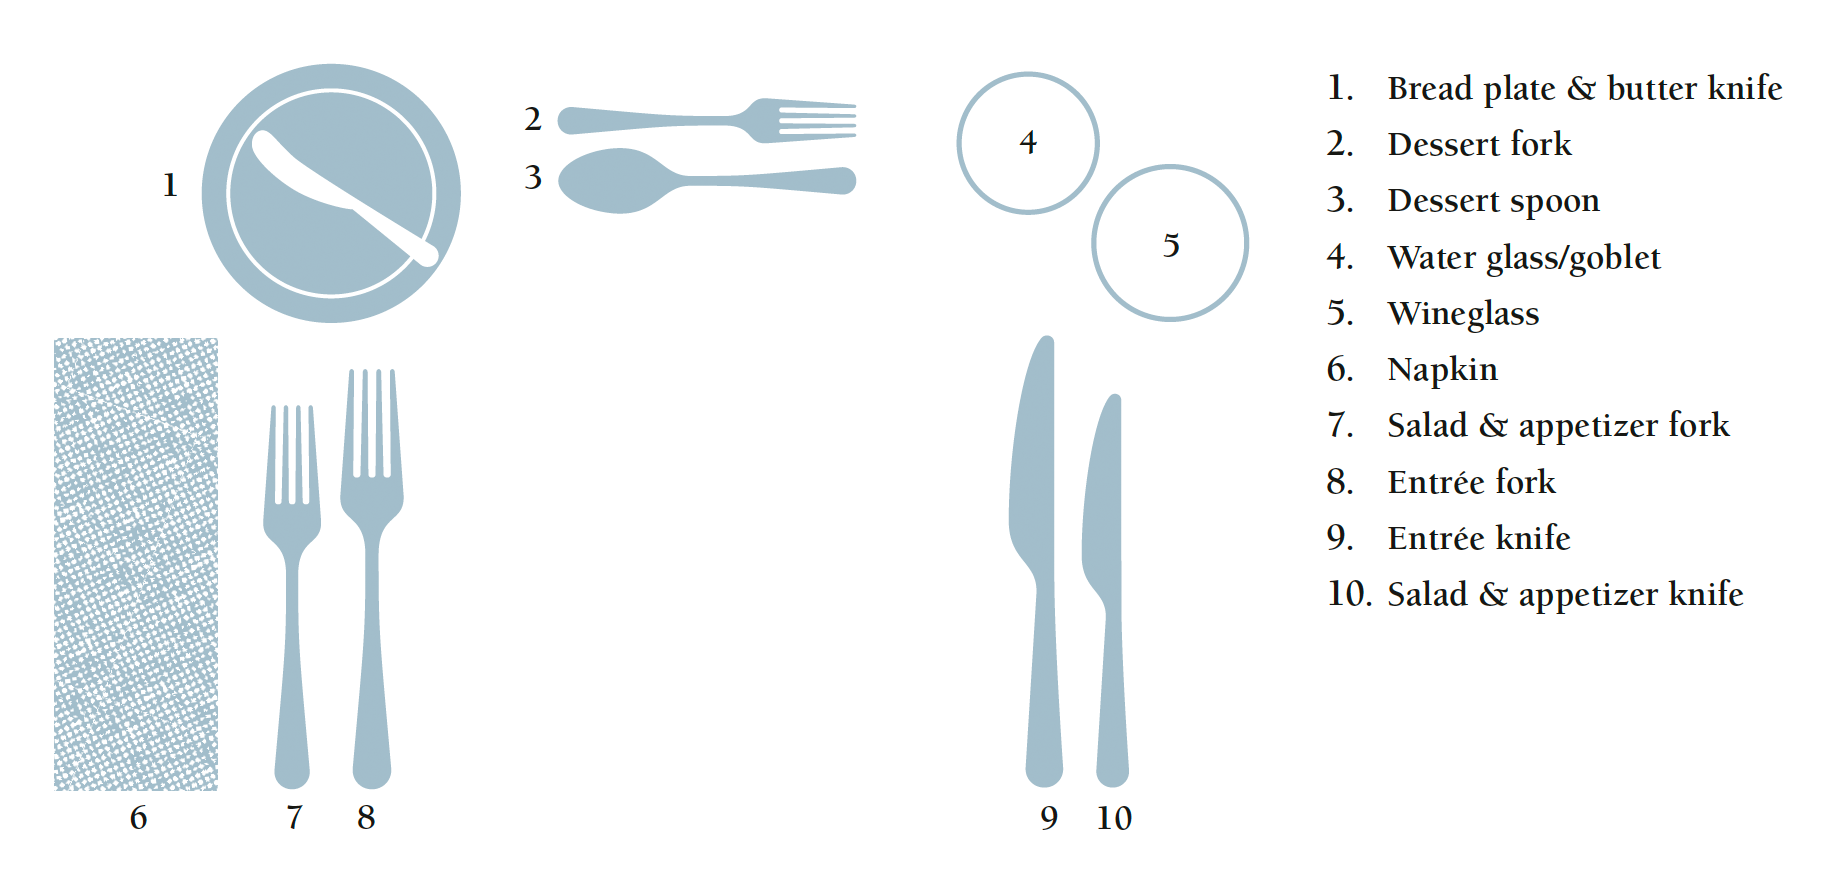 Baby Utensils 101: How to teach utensil use and the best ones - My Little  Eater